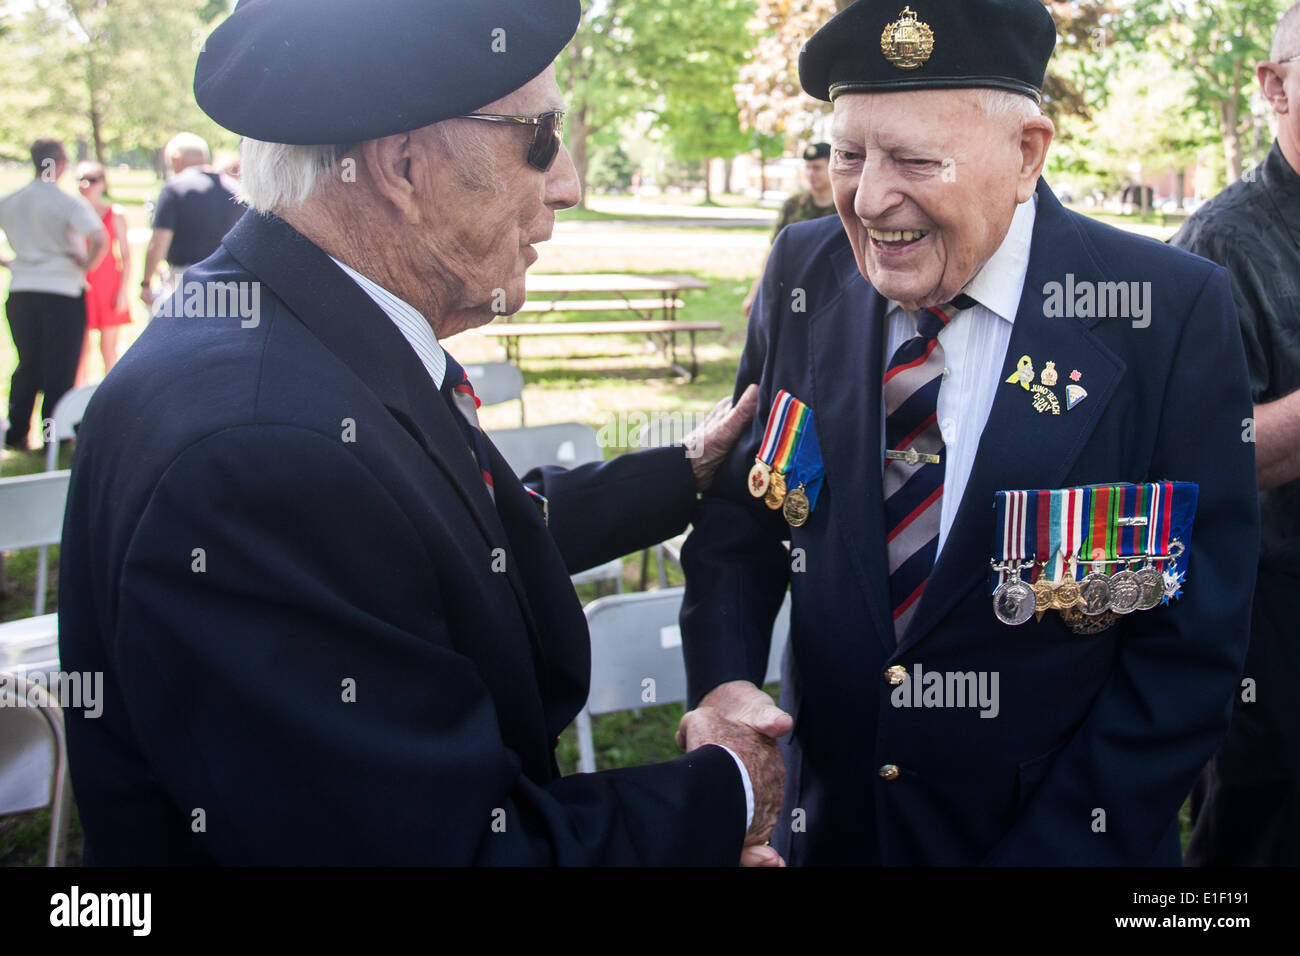 London, Ontario, Canada. 1st June 2014. Active and veteran members of the Canadian Army's 1st Hussars parade through London Ontario, Canada on June 1, 2014 to commerate the 70th Anniversary of D-Day. The 1st Hussars landed on Juno Beach in Normandy France as part of operation Overload. Each year the still active military unit marches to Victoria Park where a Sherman Tank named 'Holly Roller' is on display. The tank orginally from London was part of the D-Day landing and was eventually returned to its home. Credit:  Mark Spowart/Alamy Live News Stock Photo